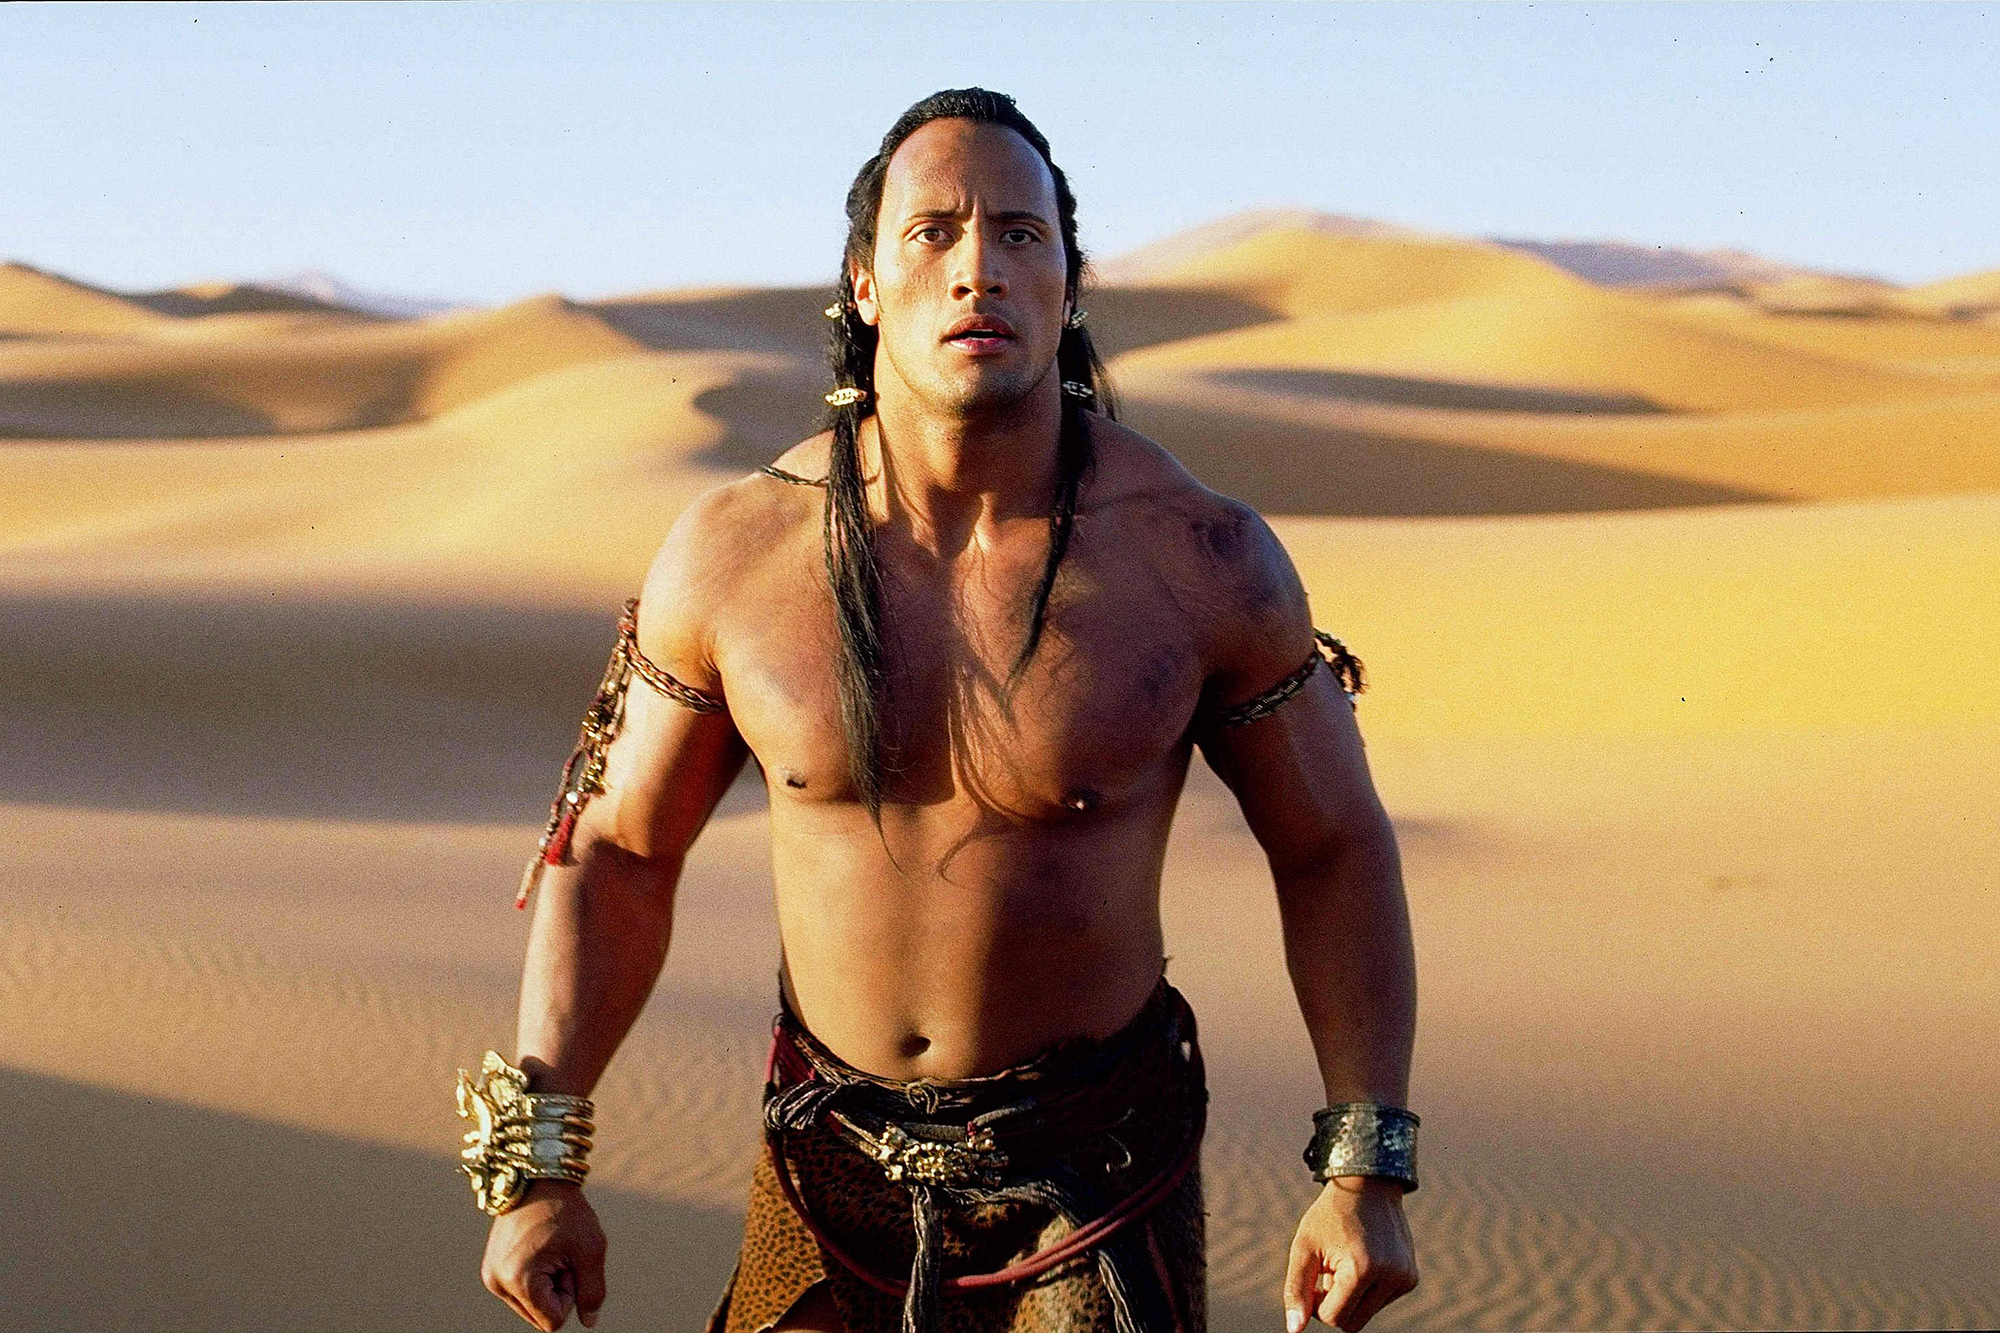 Johnson as Mathayus in The Scorpion King in 2002, his first leading role.